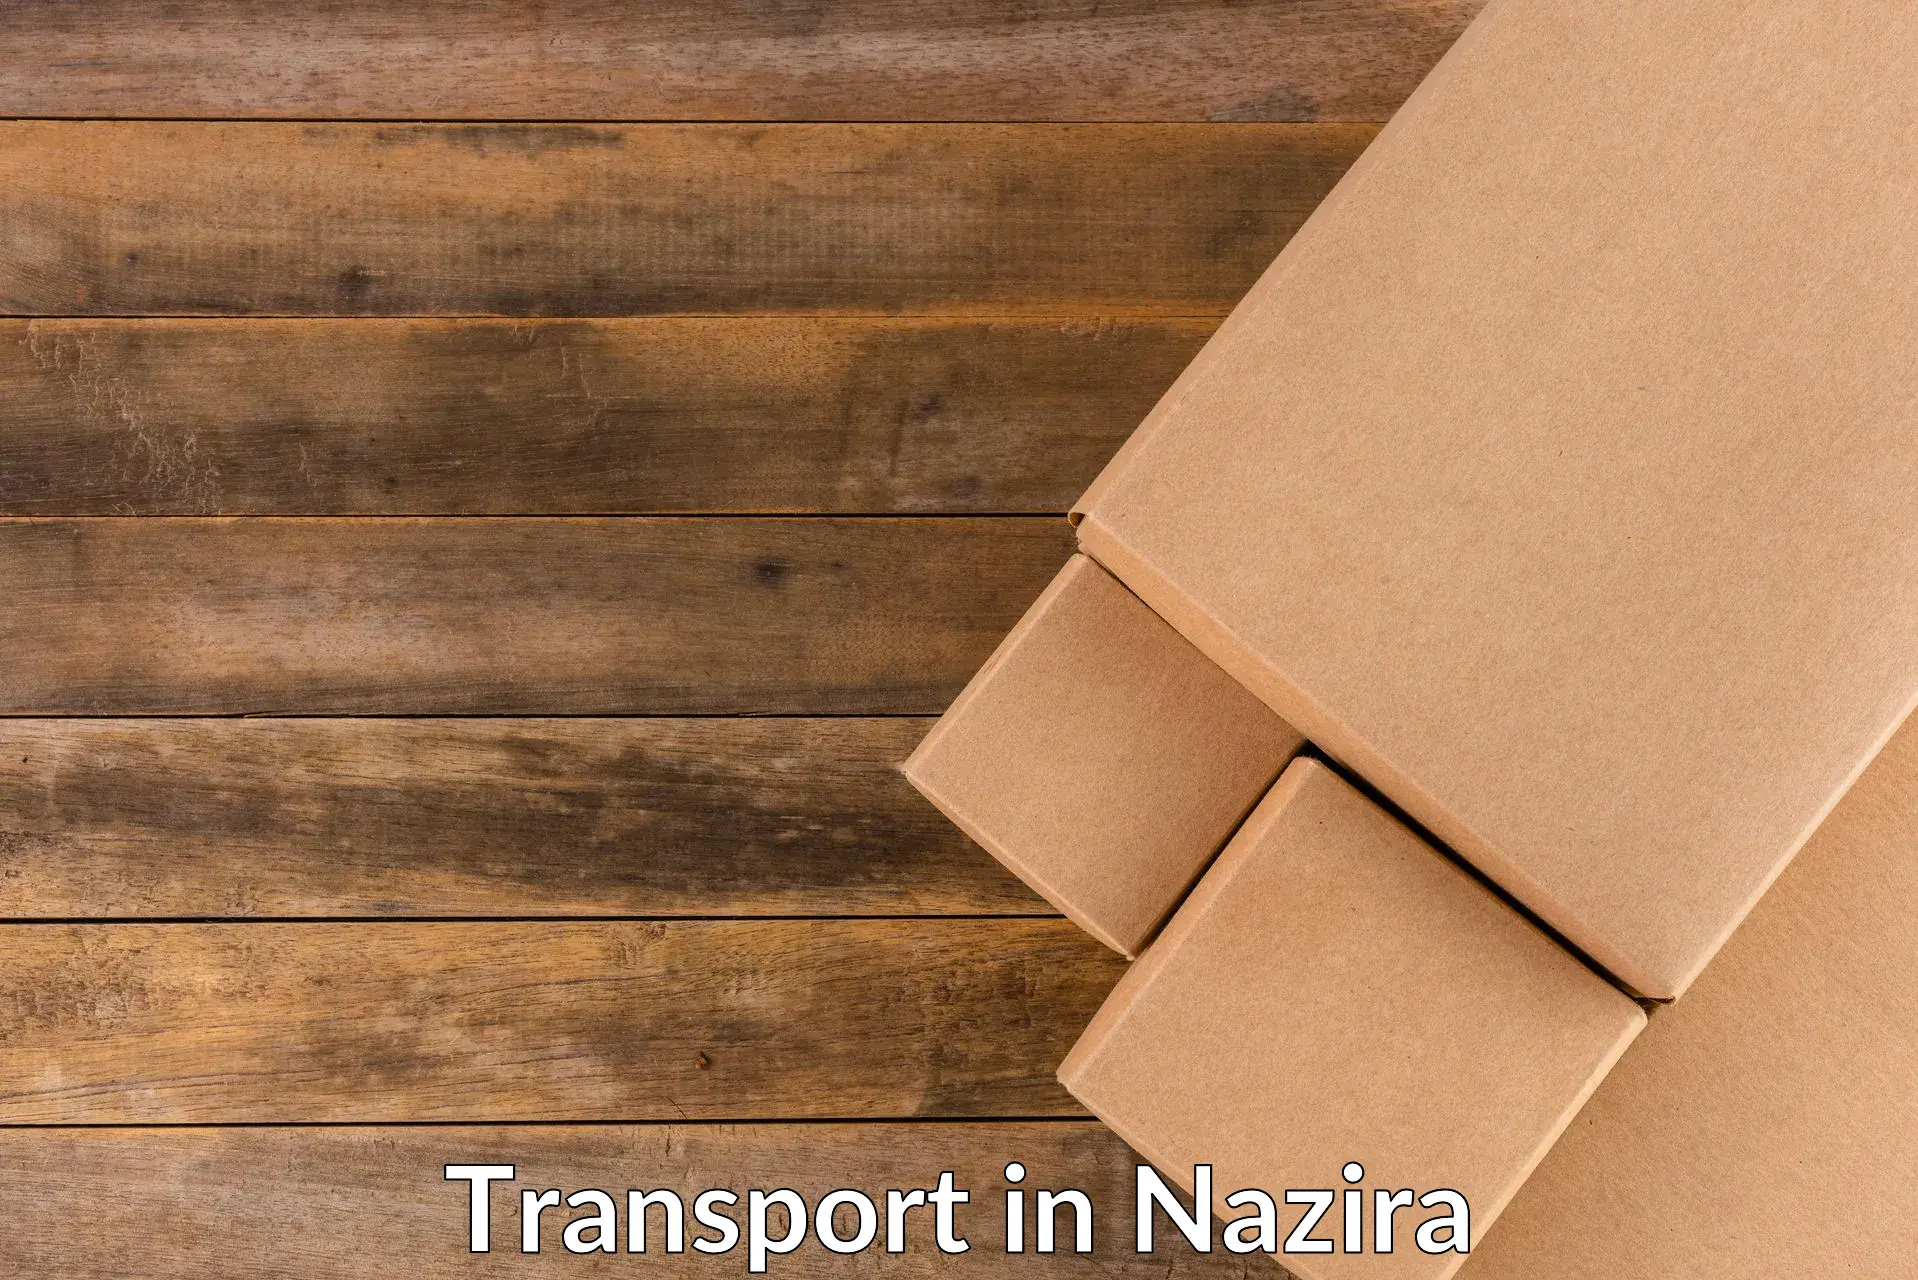 Daily parcel service transport in Nazira